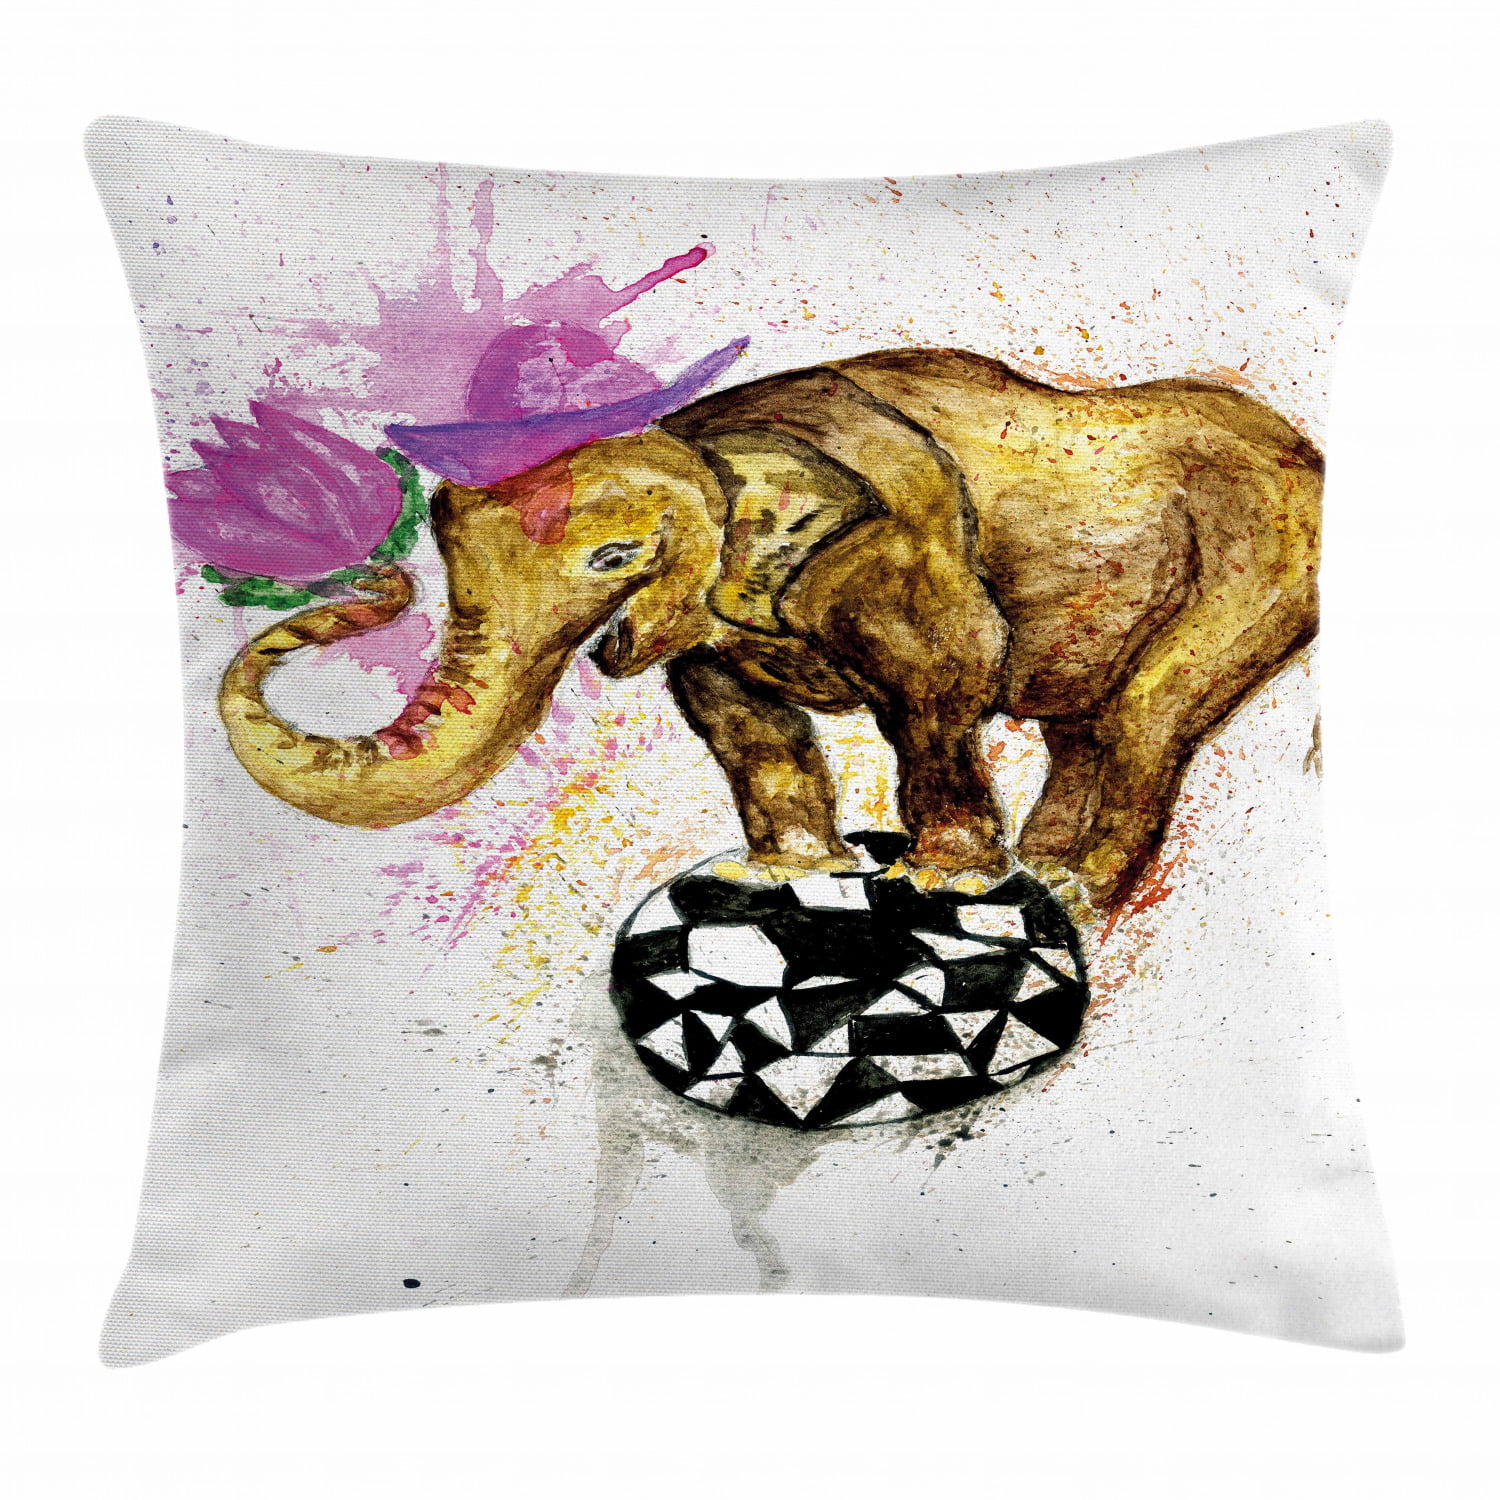 2pcs lucky Indian elephant cushion cover zippered throw pillow covers US SELLER 